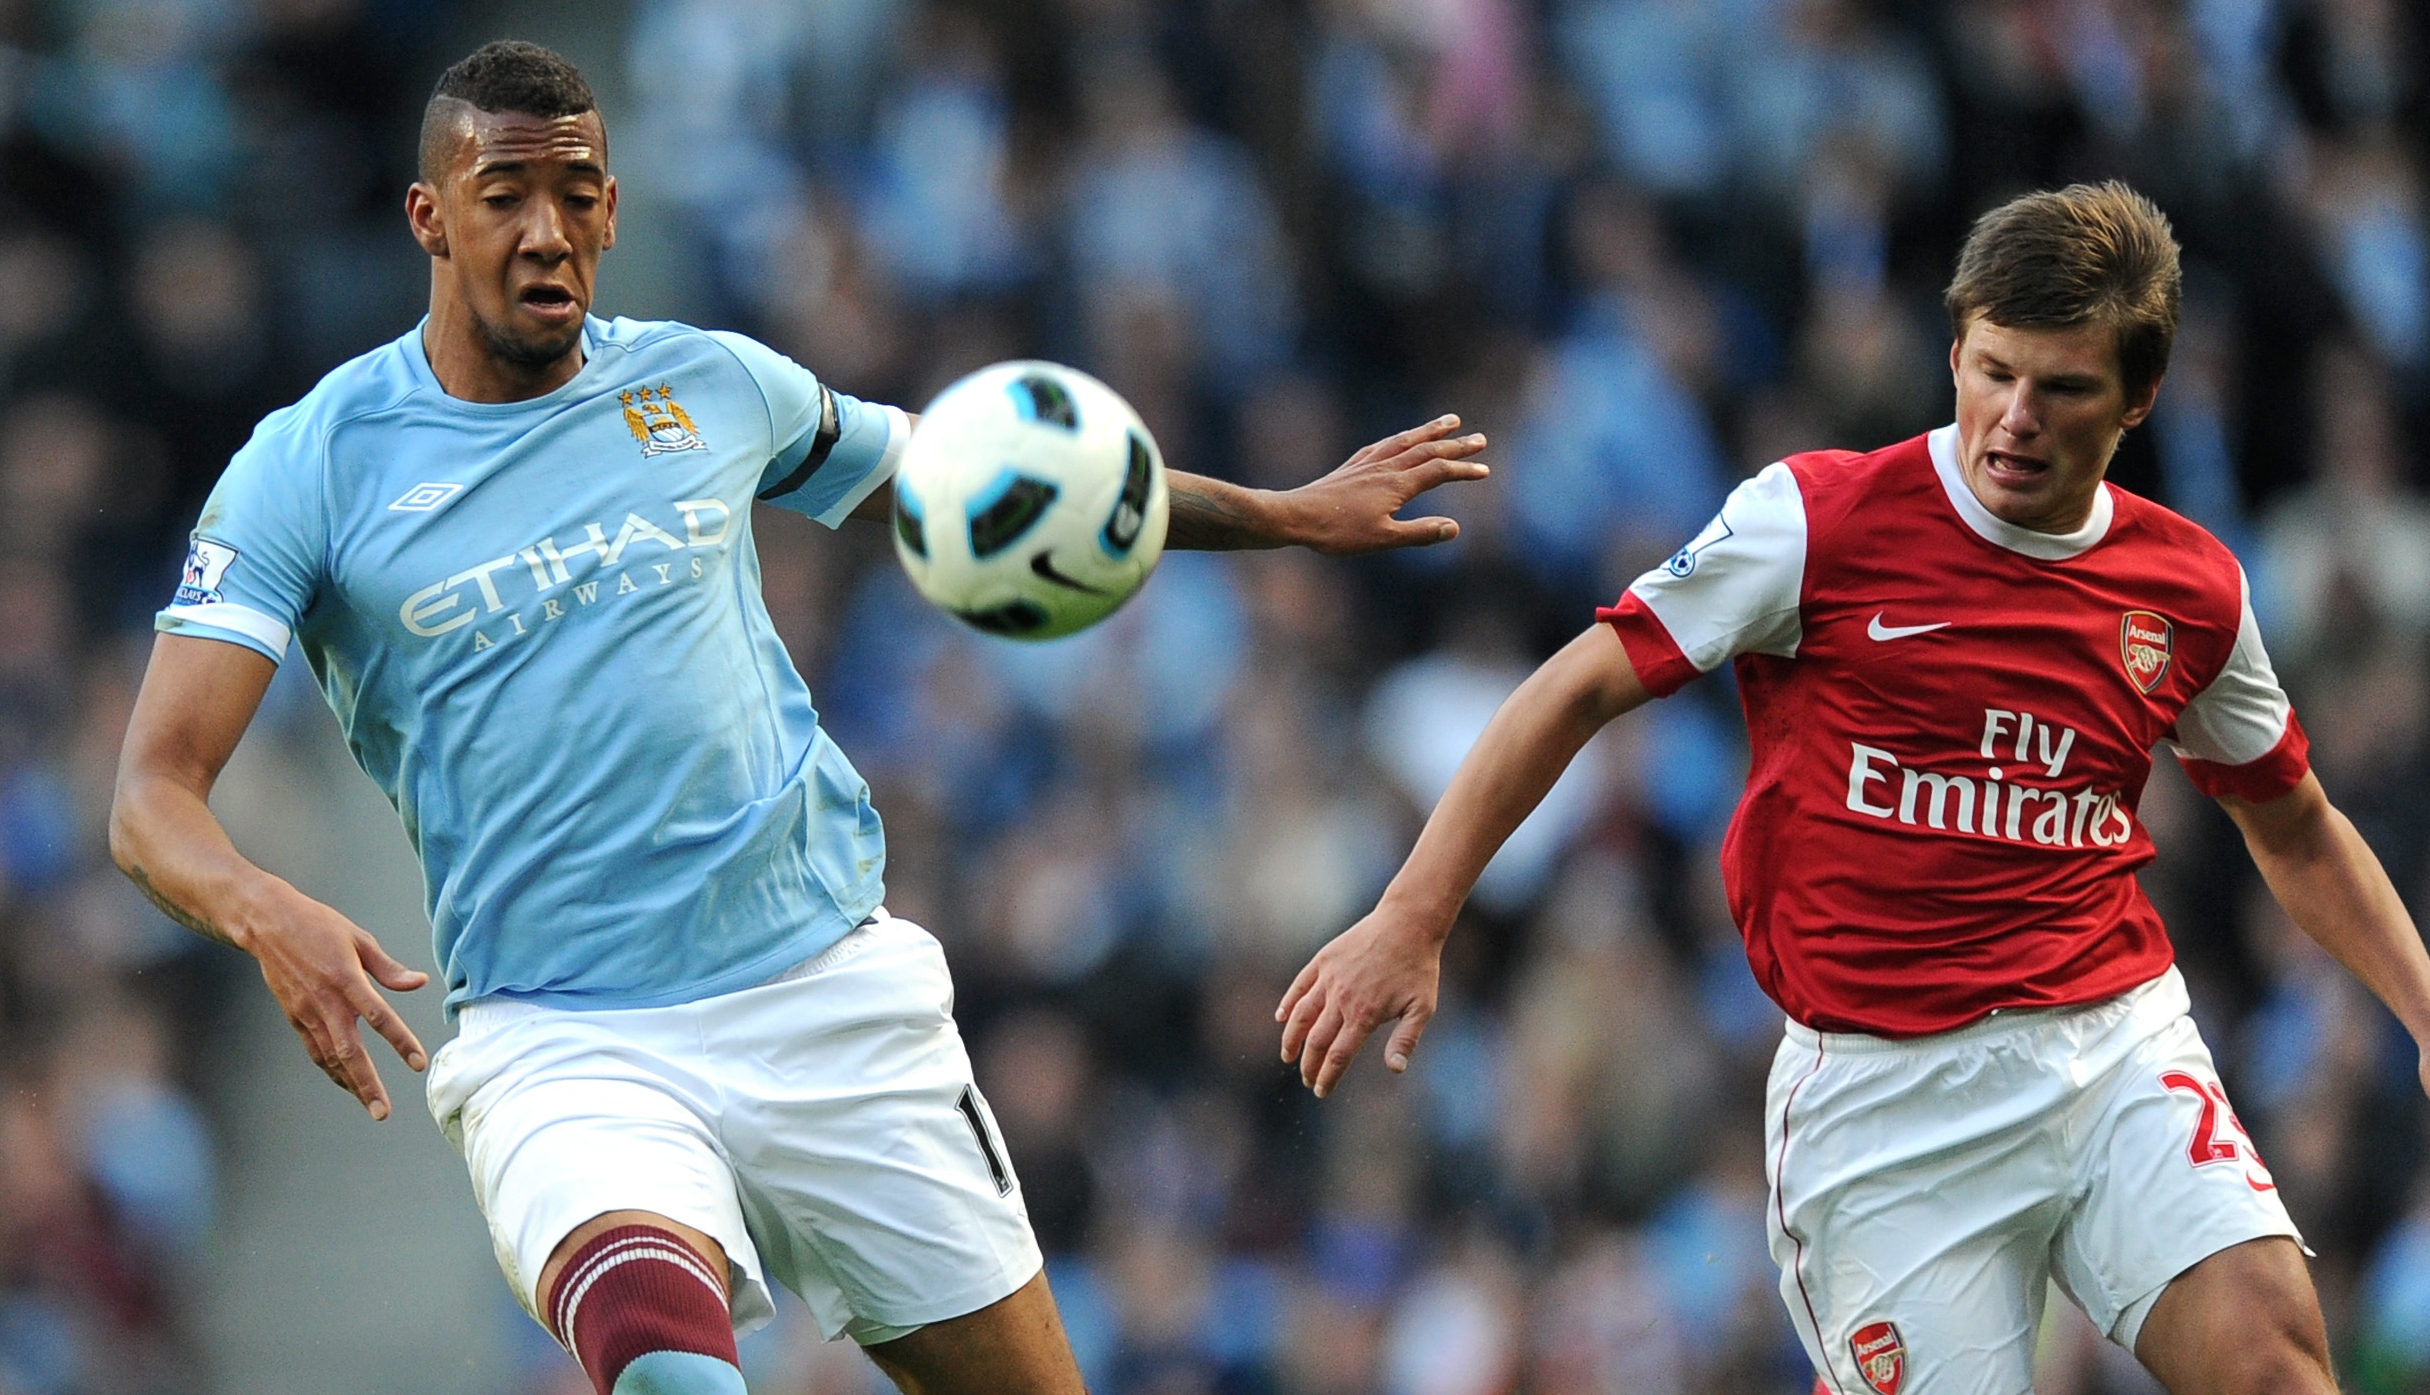 Jerome Boateng of Manchester City and Andrey Arshavin of Arsenal (Photo by AMA/Corbis via Getty Images)